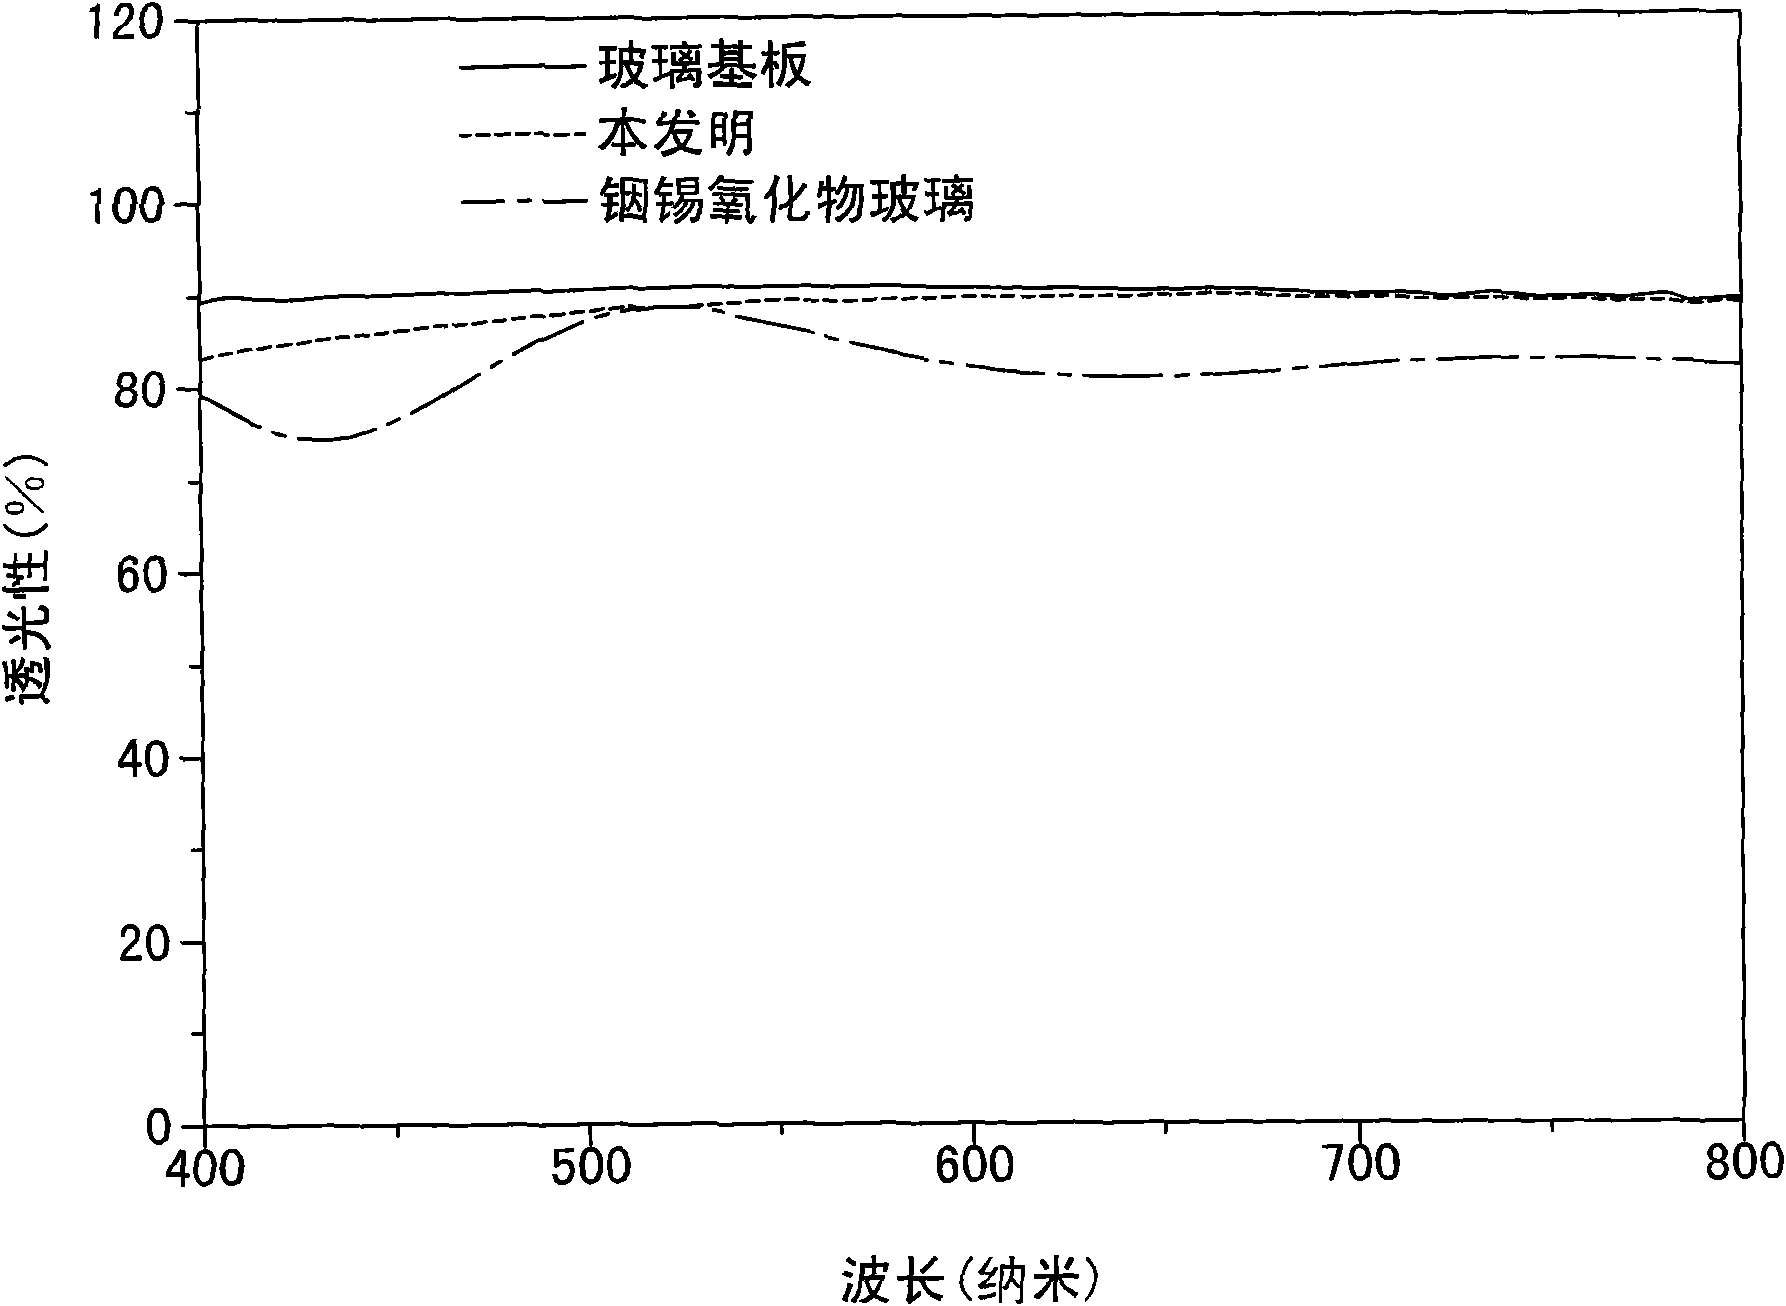 Composite substrate structure